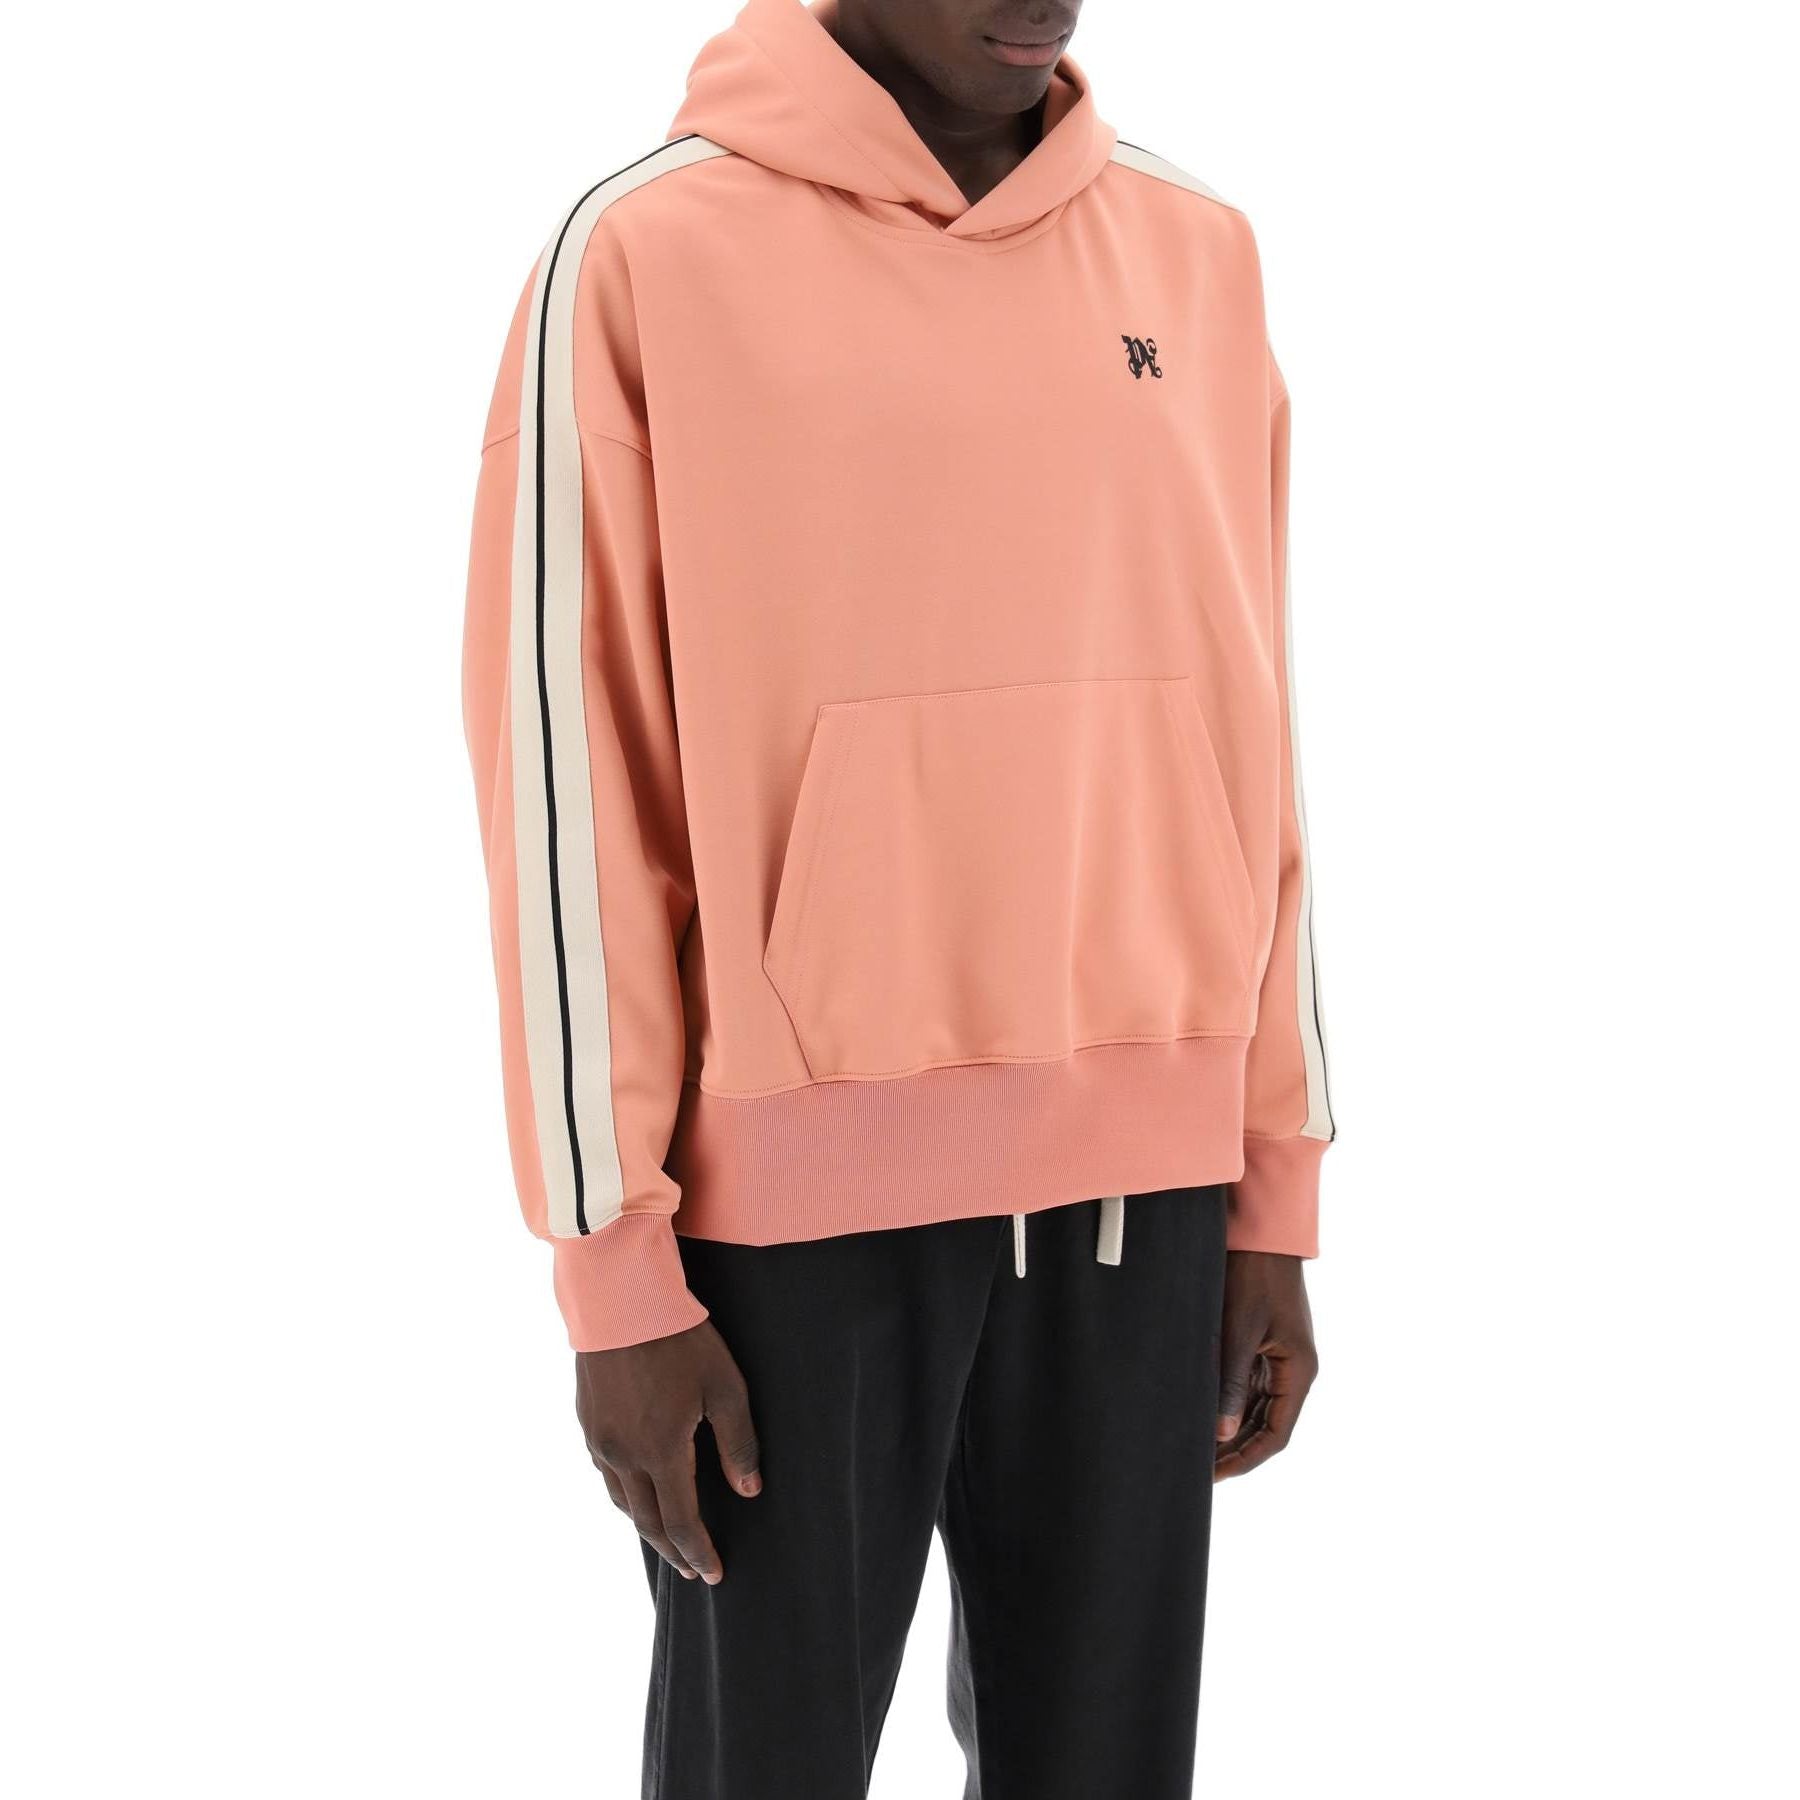 "Track Sweatshirt With Contrasting Bands